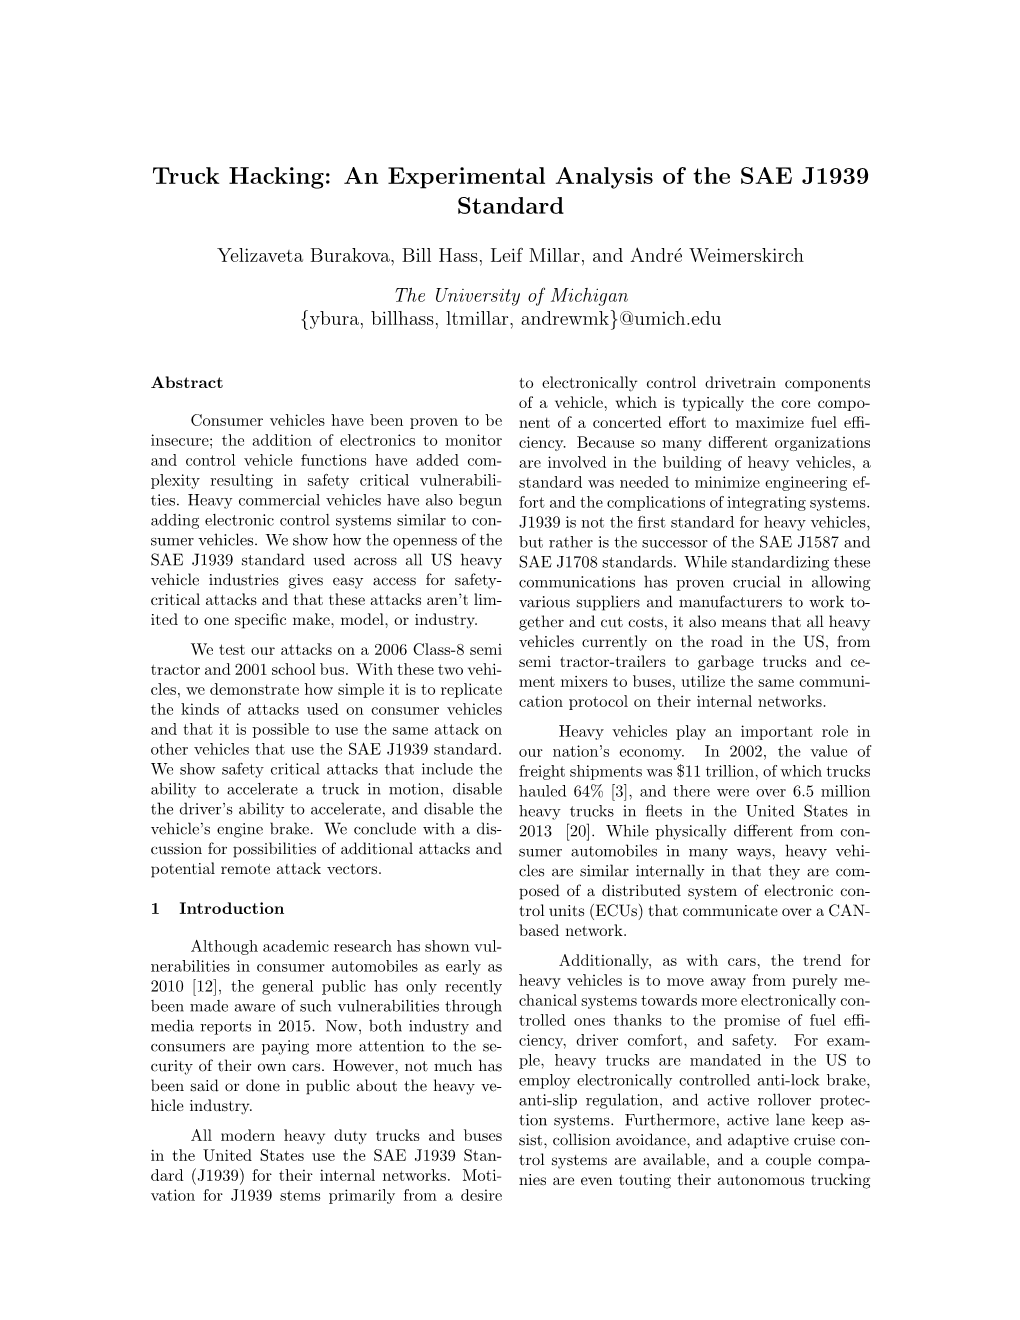 Truck Hacking: an Experimental Analysis of the SAE J1939 Standard